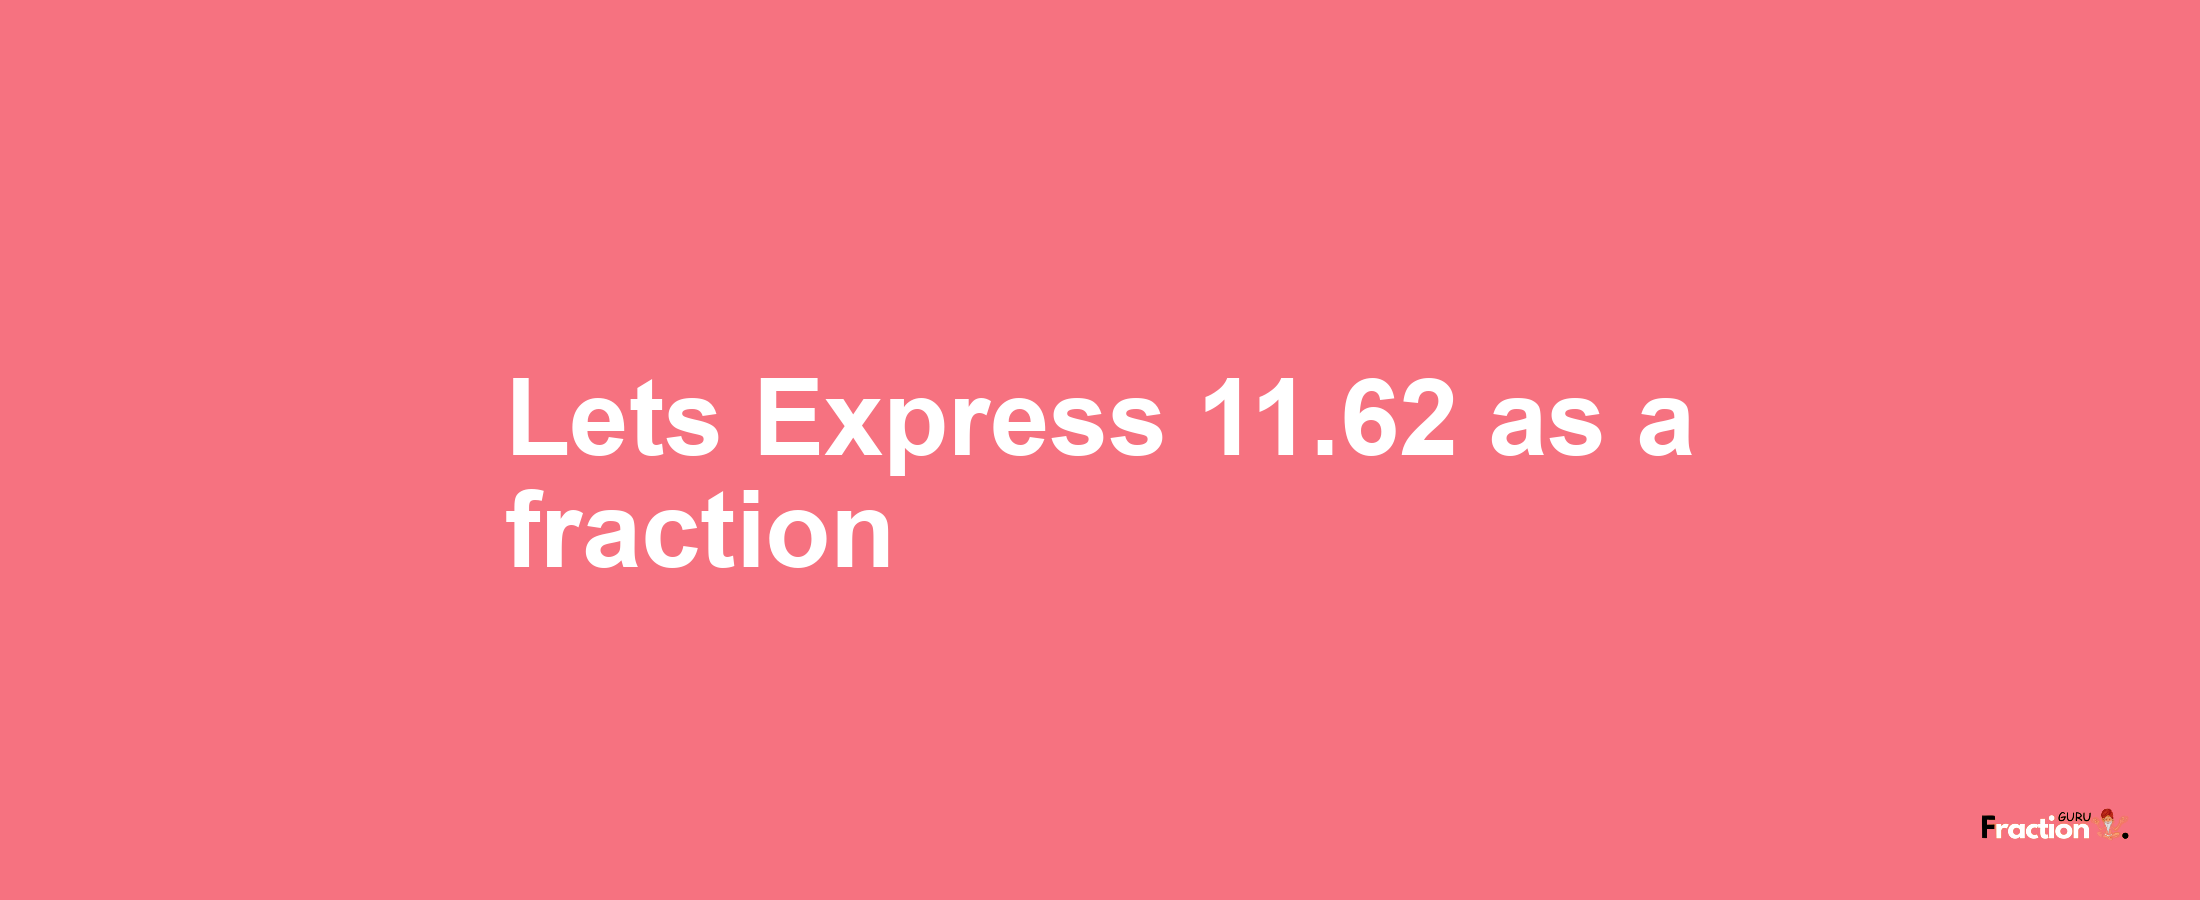 Lets Express 11.62 as afraction